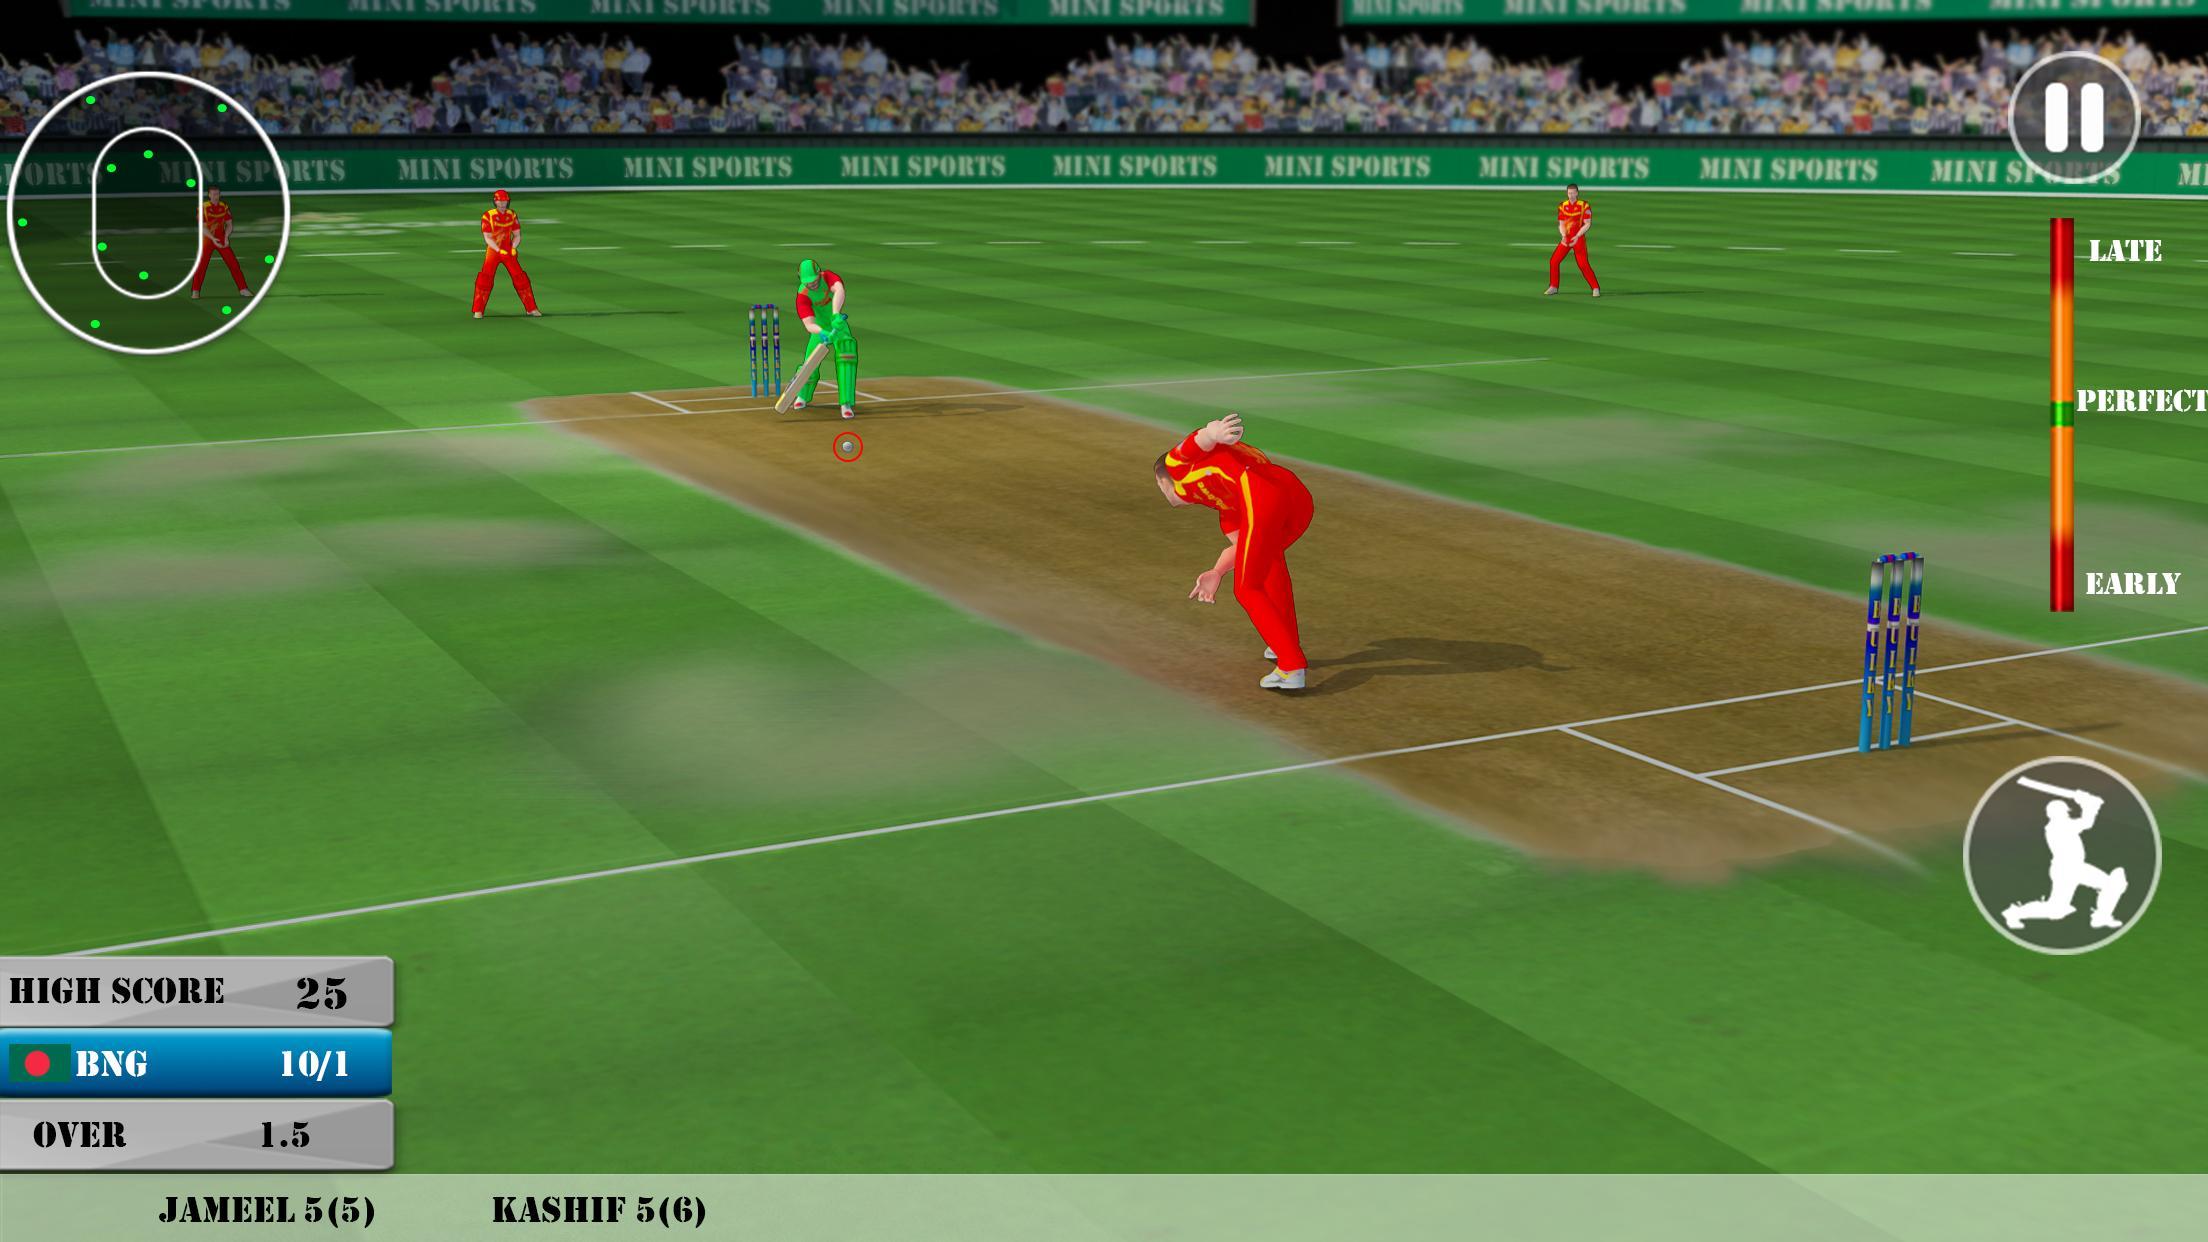 Download Ashes Cricket 19 - Torrent Game for PC